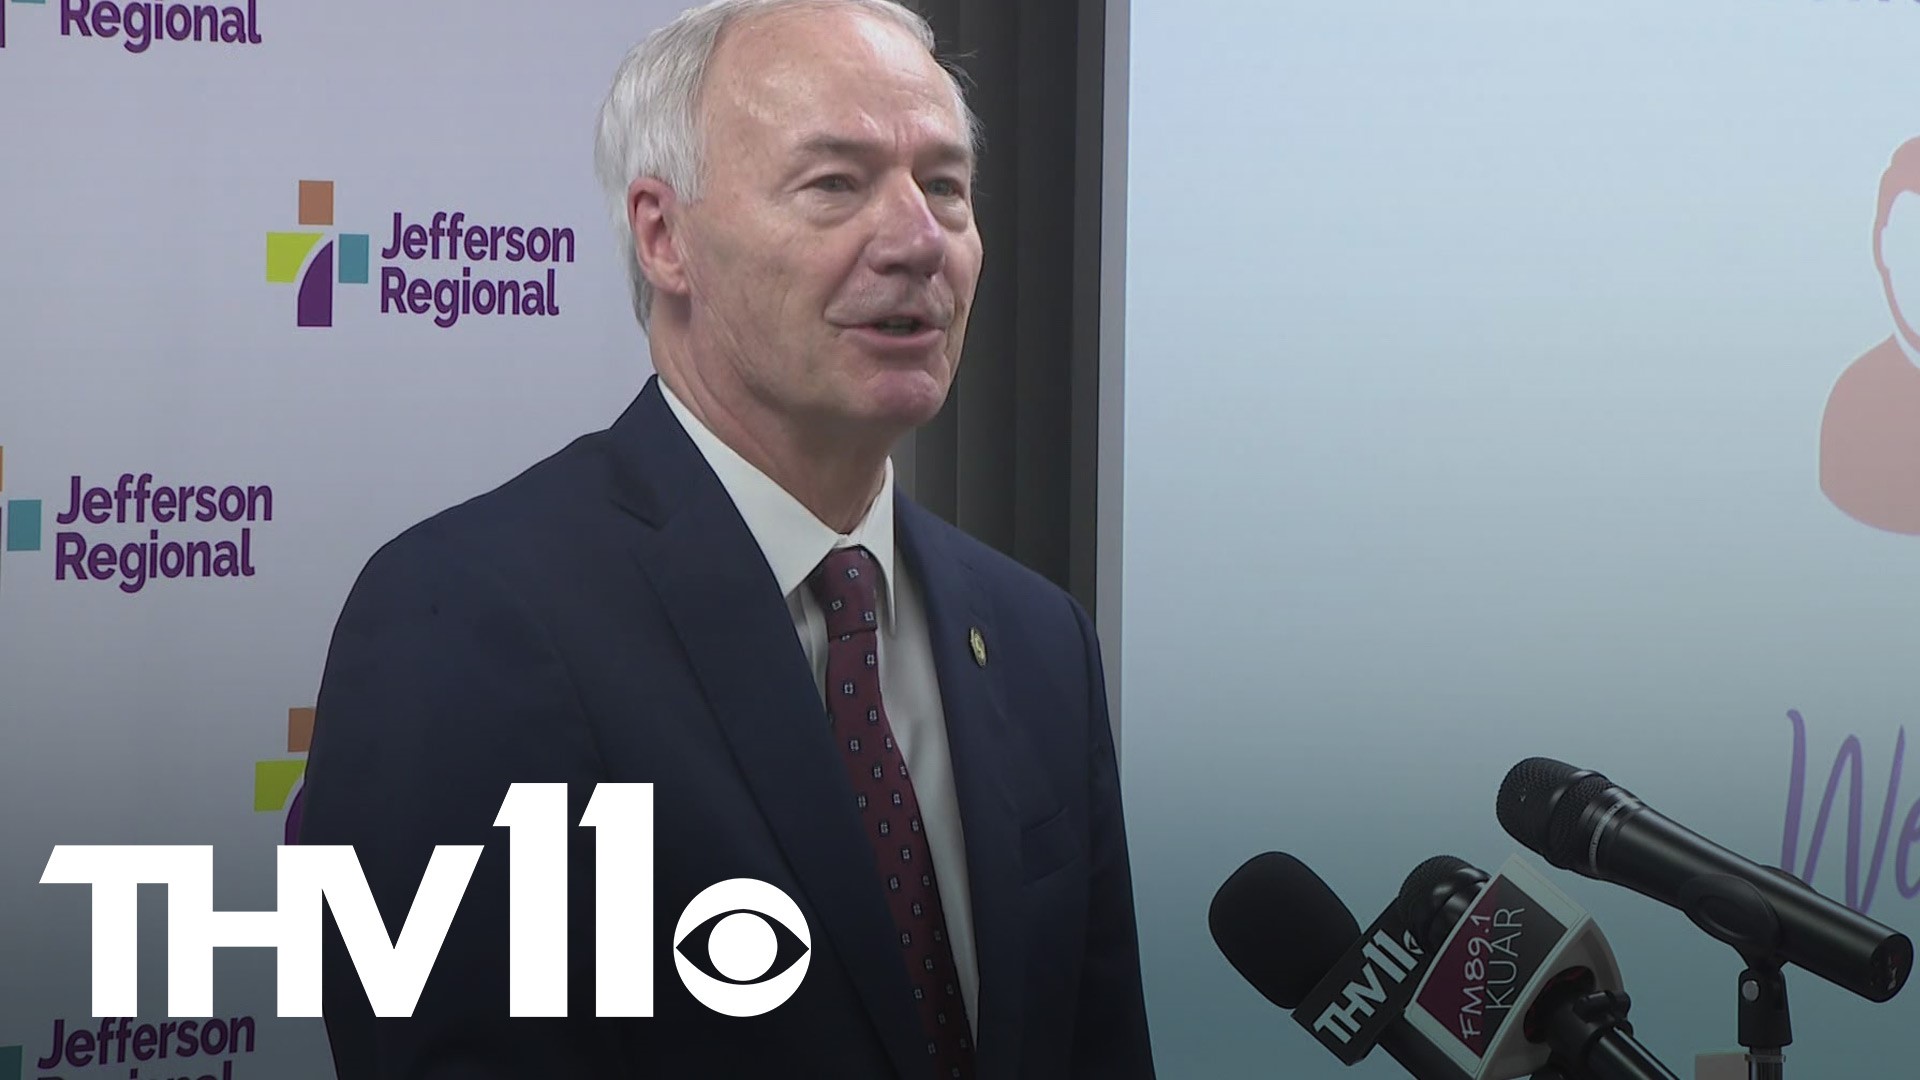 Gov. Asa Hutchinson and others reflected on the anniversary of the first COVID-19 case in Arkansas, which was reported in Pine Bluff.